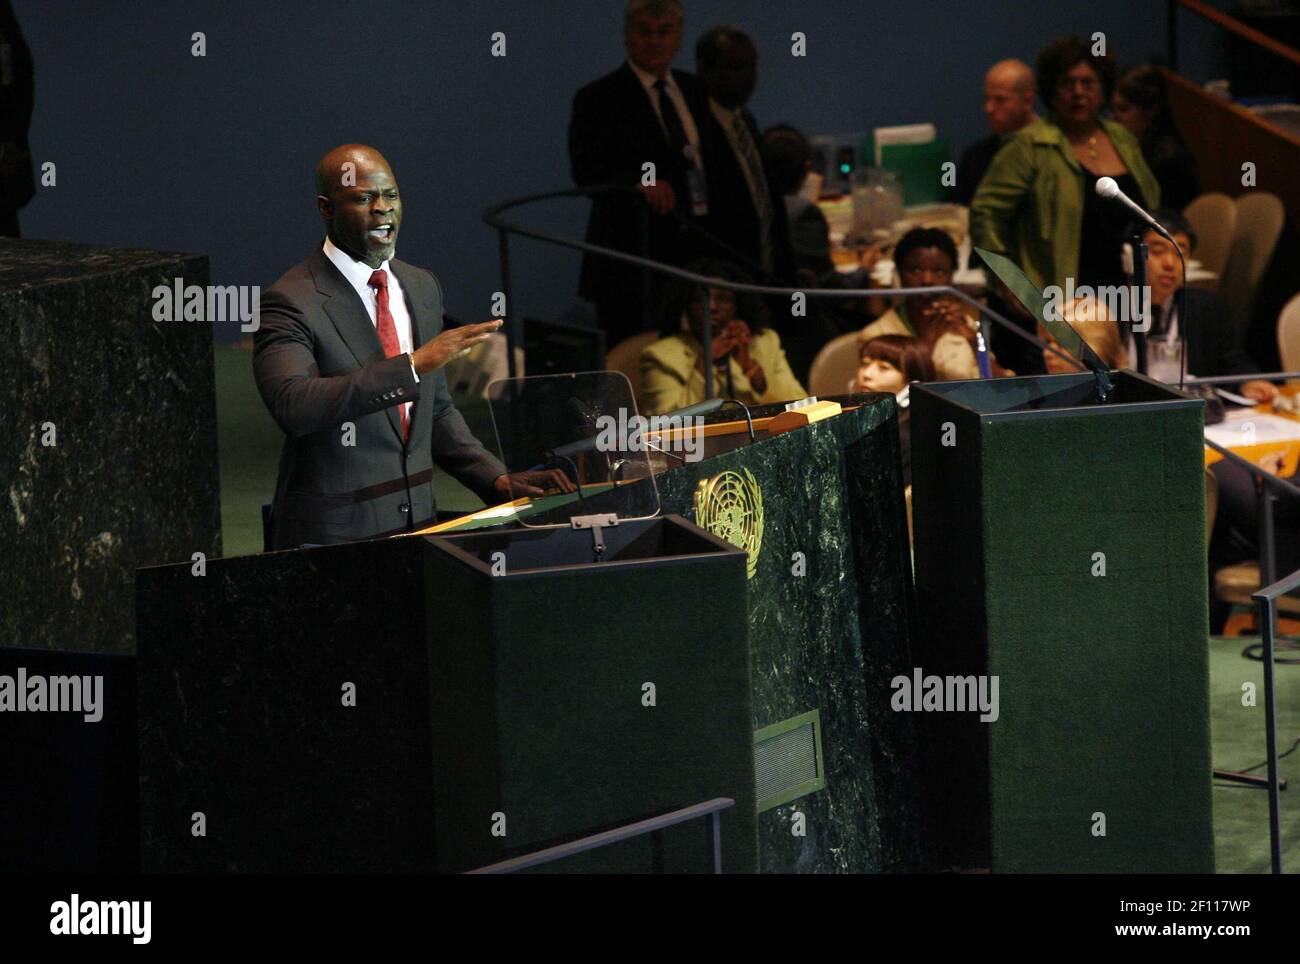 22 September 2009 - New York, NY - Actor Djimon Hounsou speaks before President Barack Obama delivers remarks at UN Secretary General Ban Ki-moon's Climate Change Summit at the United Nations Headquarters in New York City on September 22, 2009. Photo Credit : John Angelillo/Pool/Sipa Press/0909222320 Stock Photo